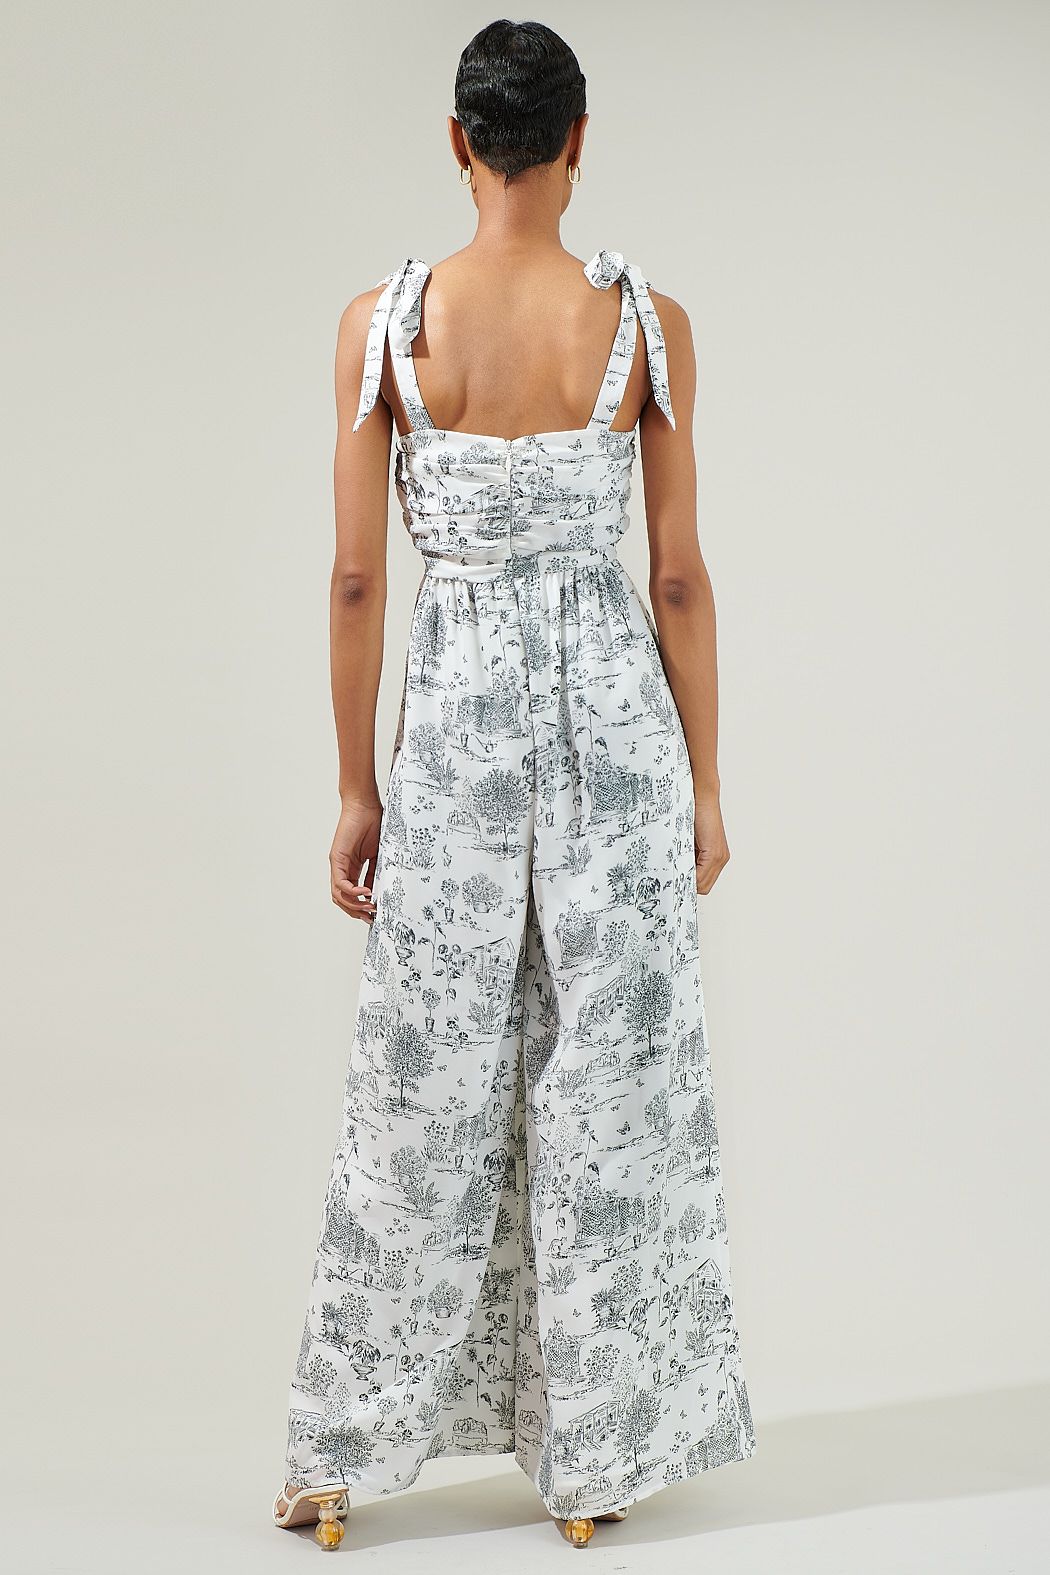 TOILLE JUMPSUIT - Out of the Blue